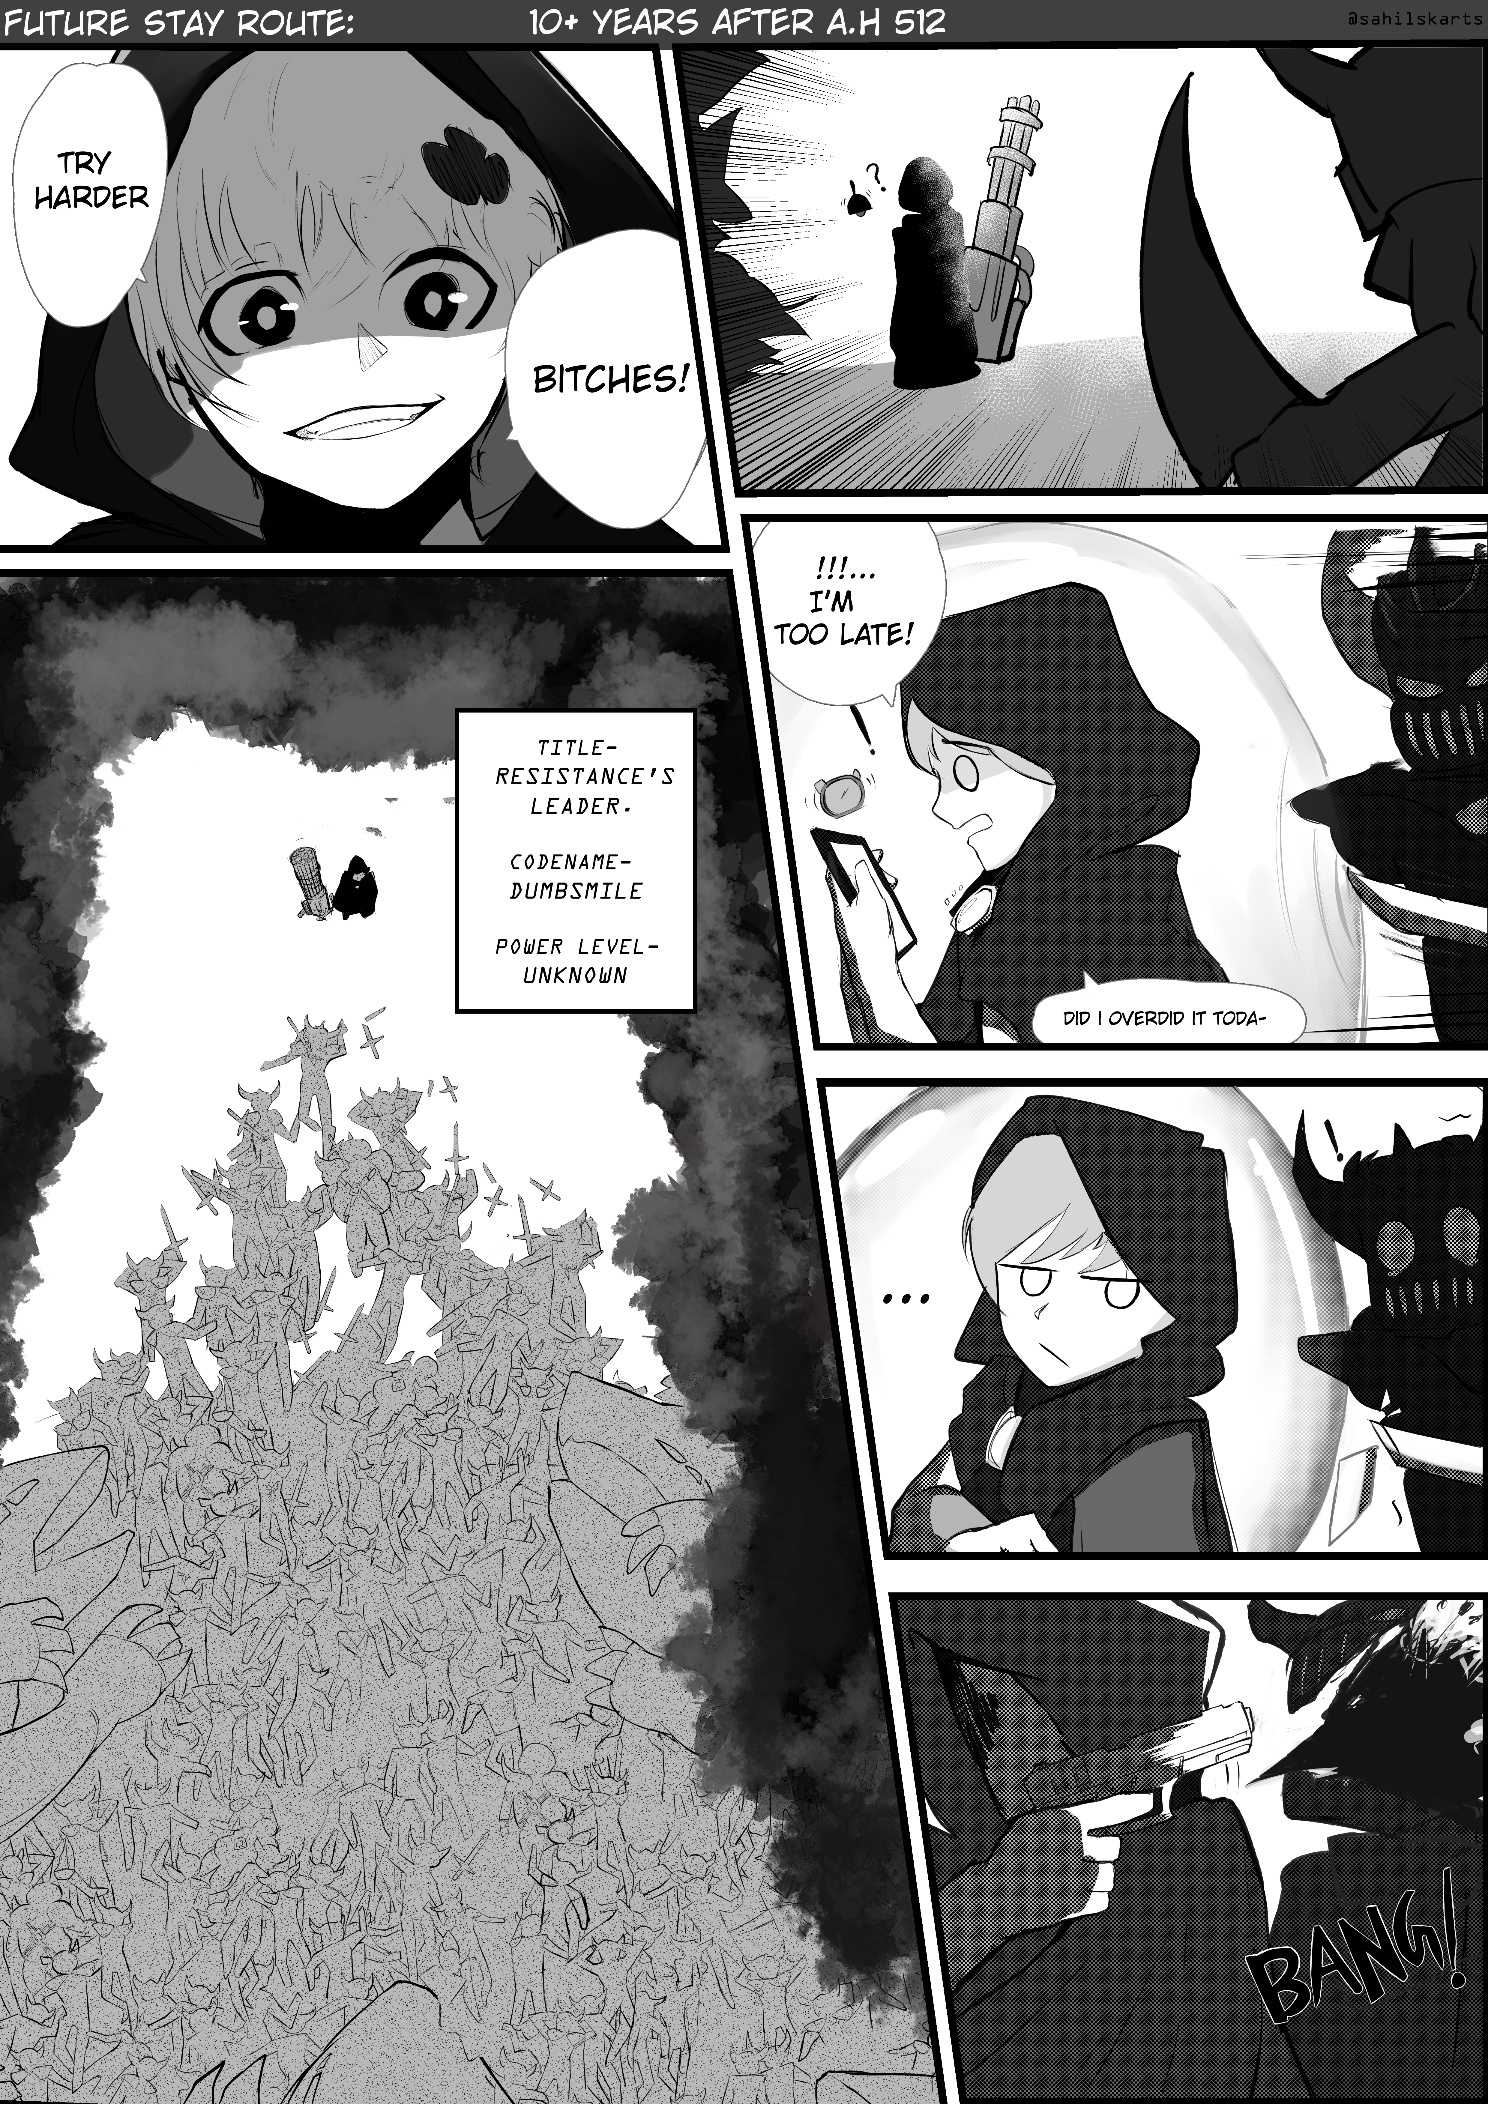 Future Stay Route - Guardiantales Chapter 3 #1